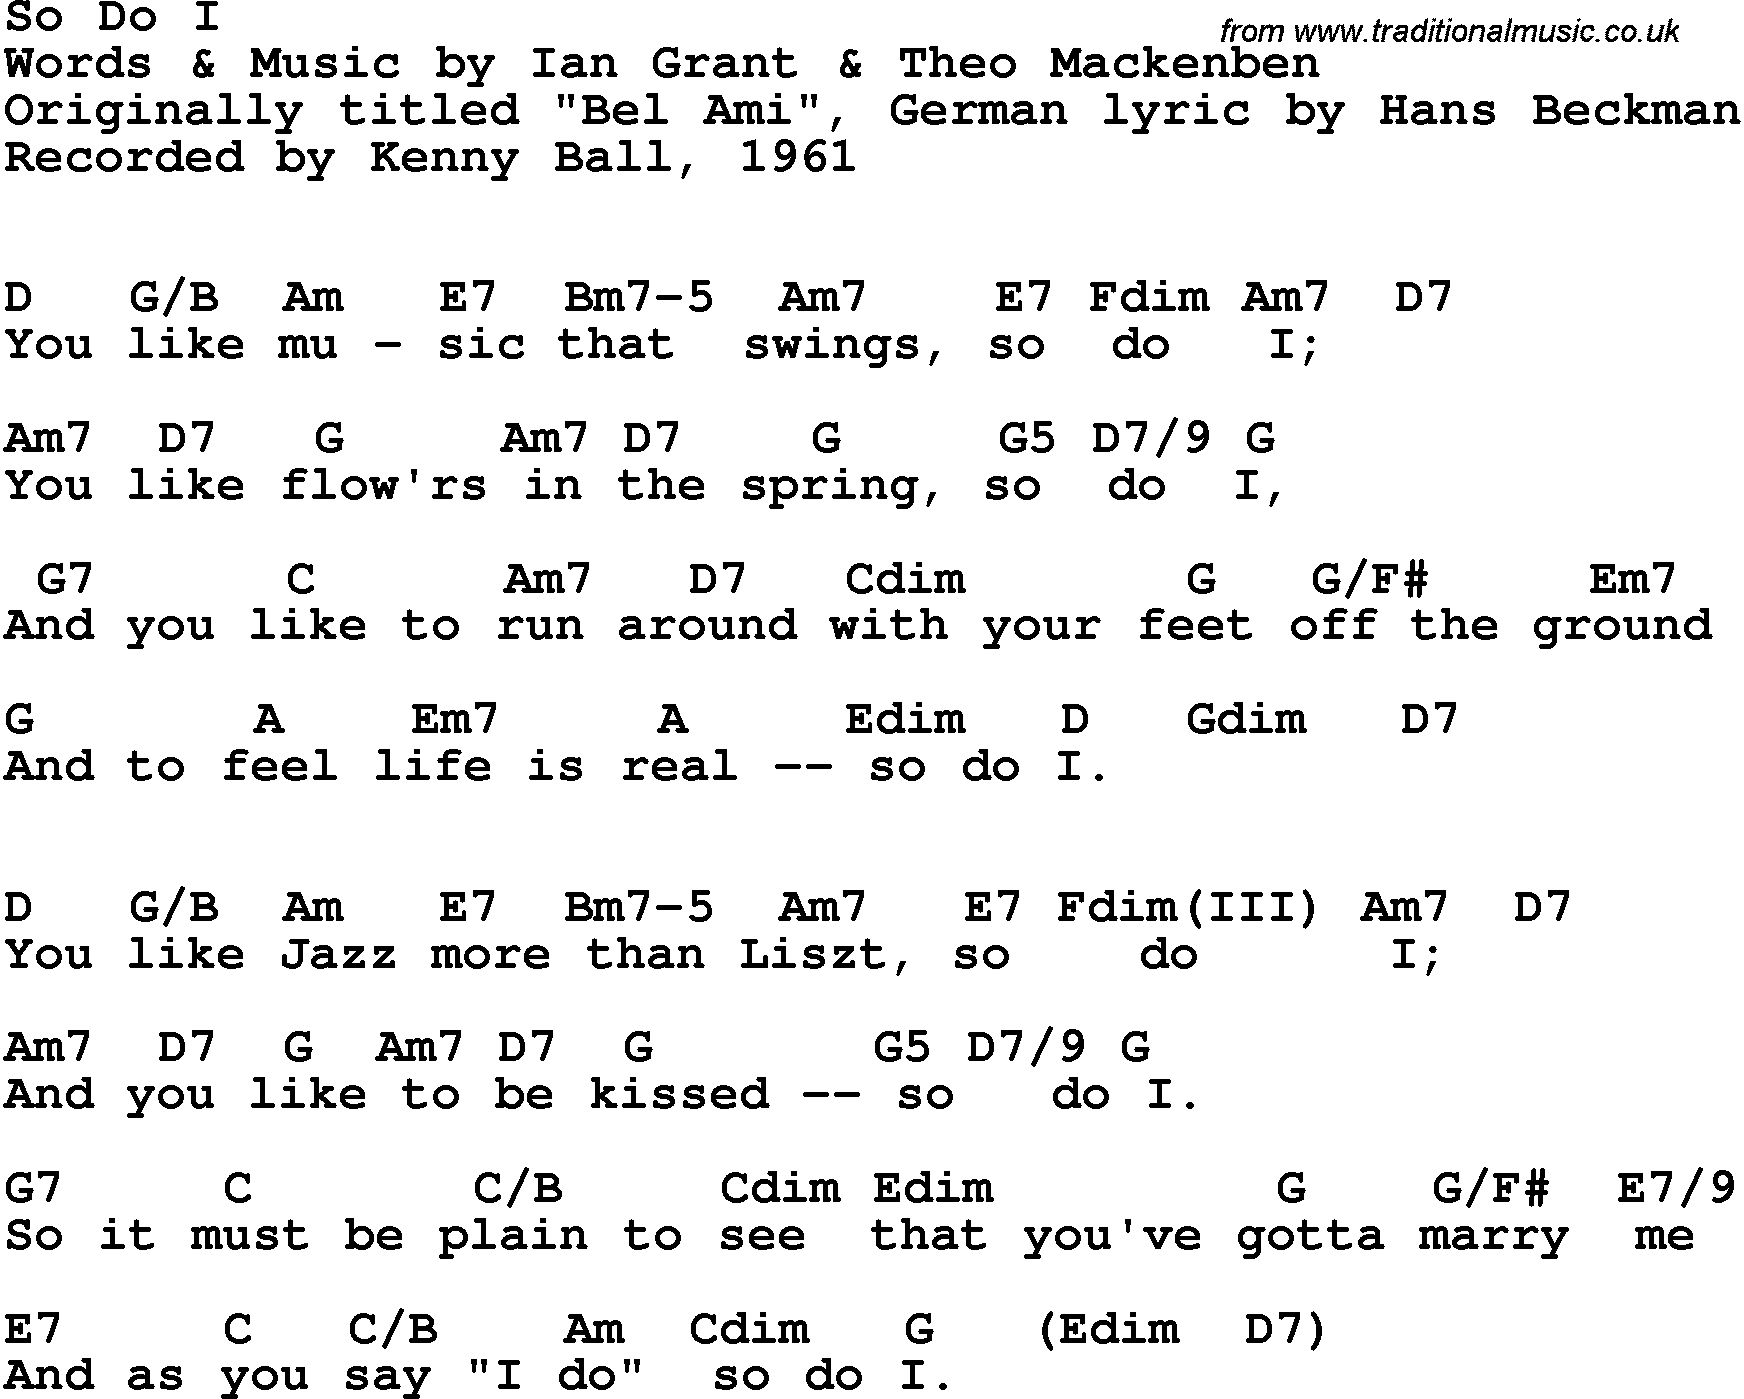 Song Lyrics with guitar chords for So Do I - Kenny Ball, 1961